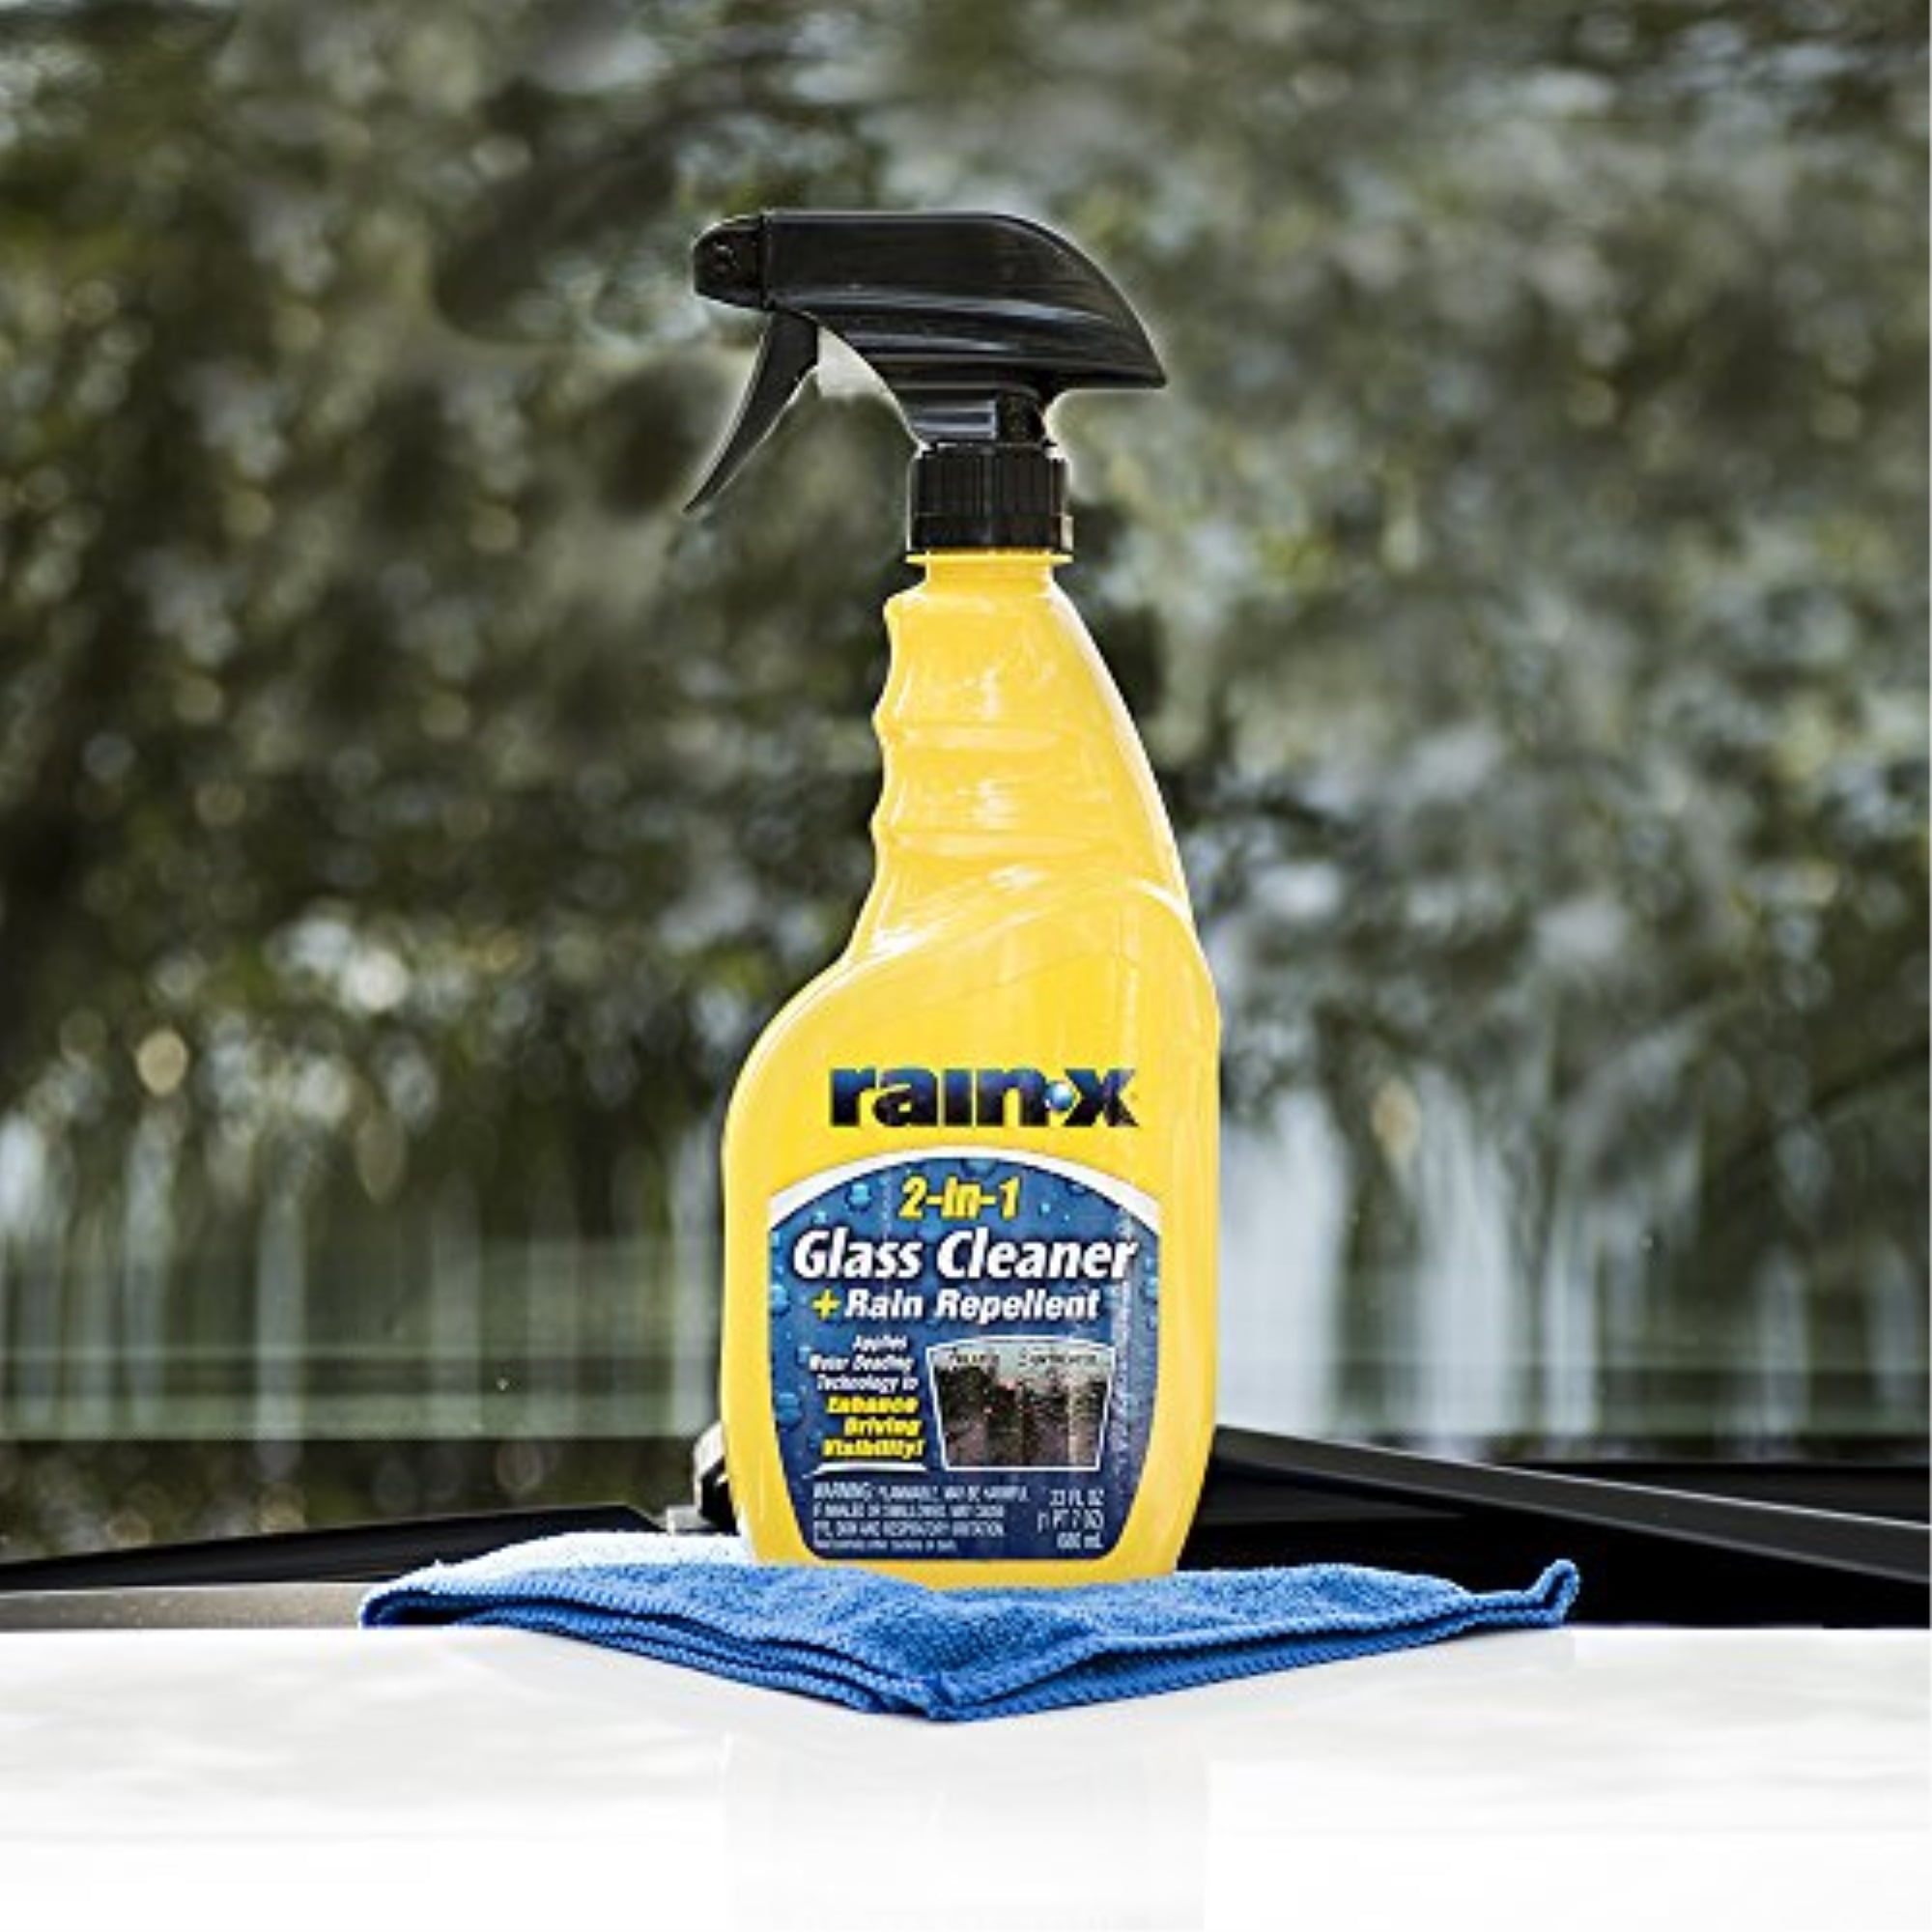  Rain-X 630018 Auto Glass Cleaner, 23 oz. - Cleans Car Windows,  Windshields and Other Auto Glass Surfaces for a Clean, Streak-Free Finish :  Everything Else